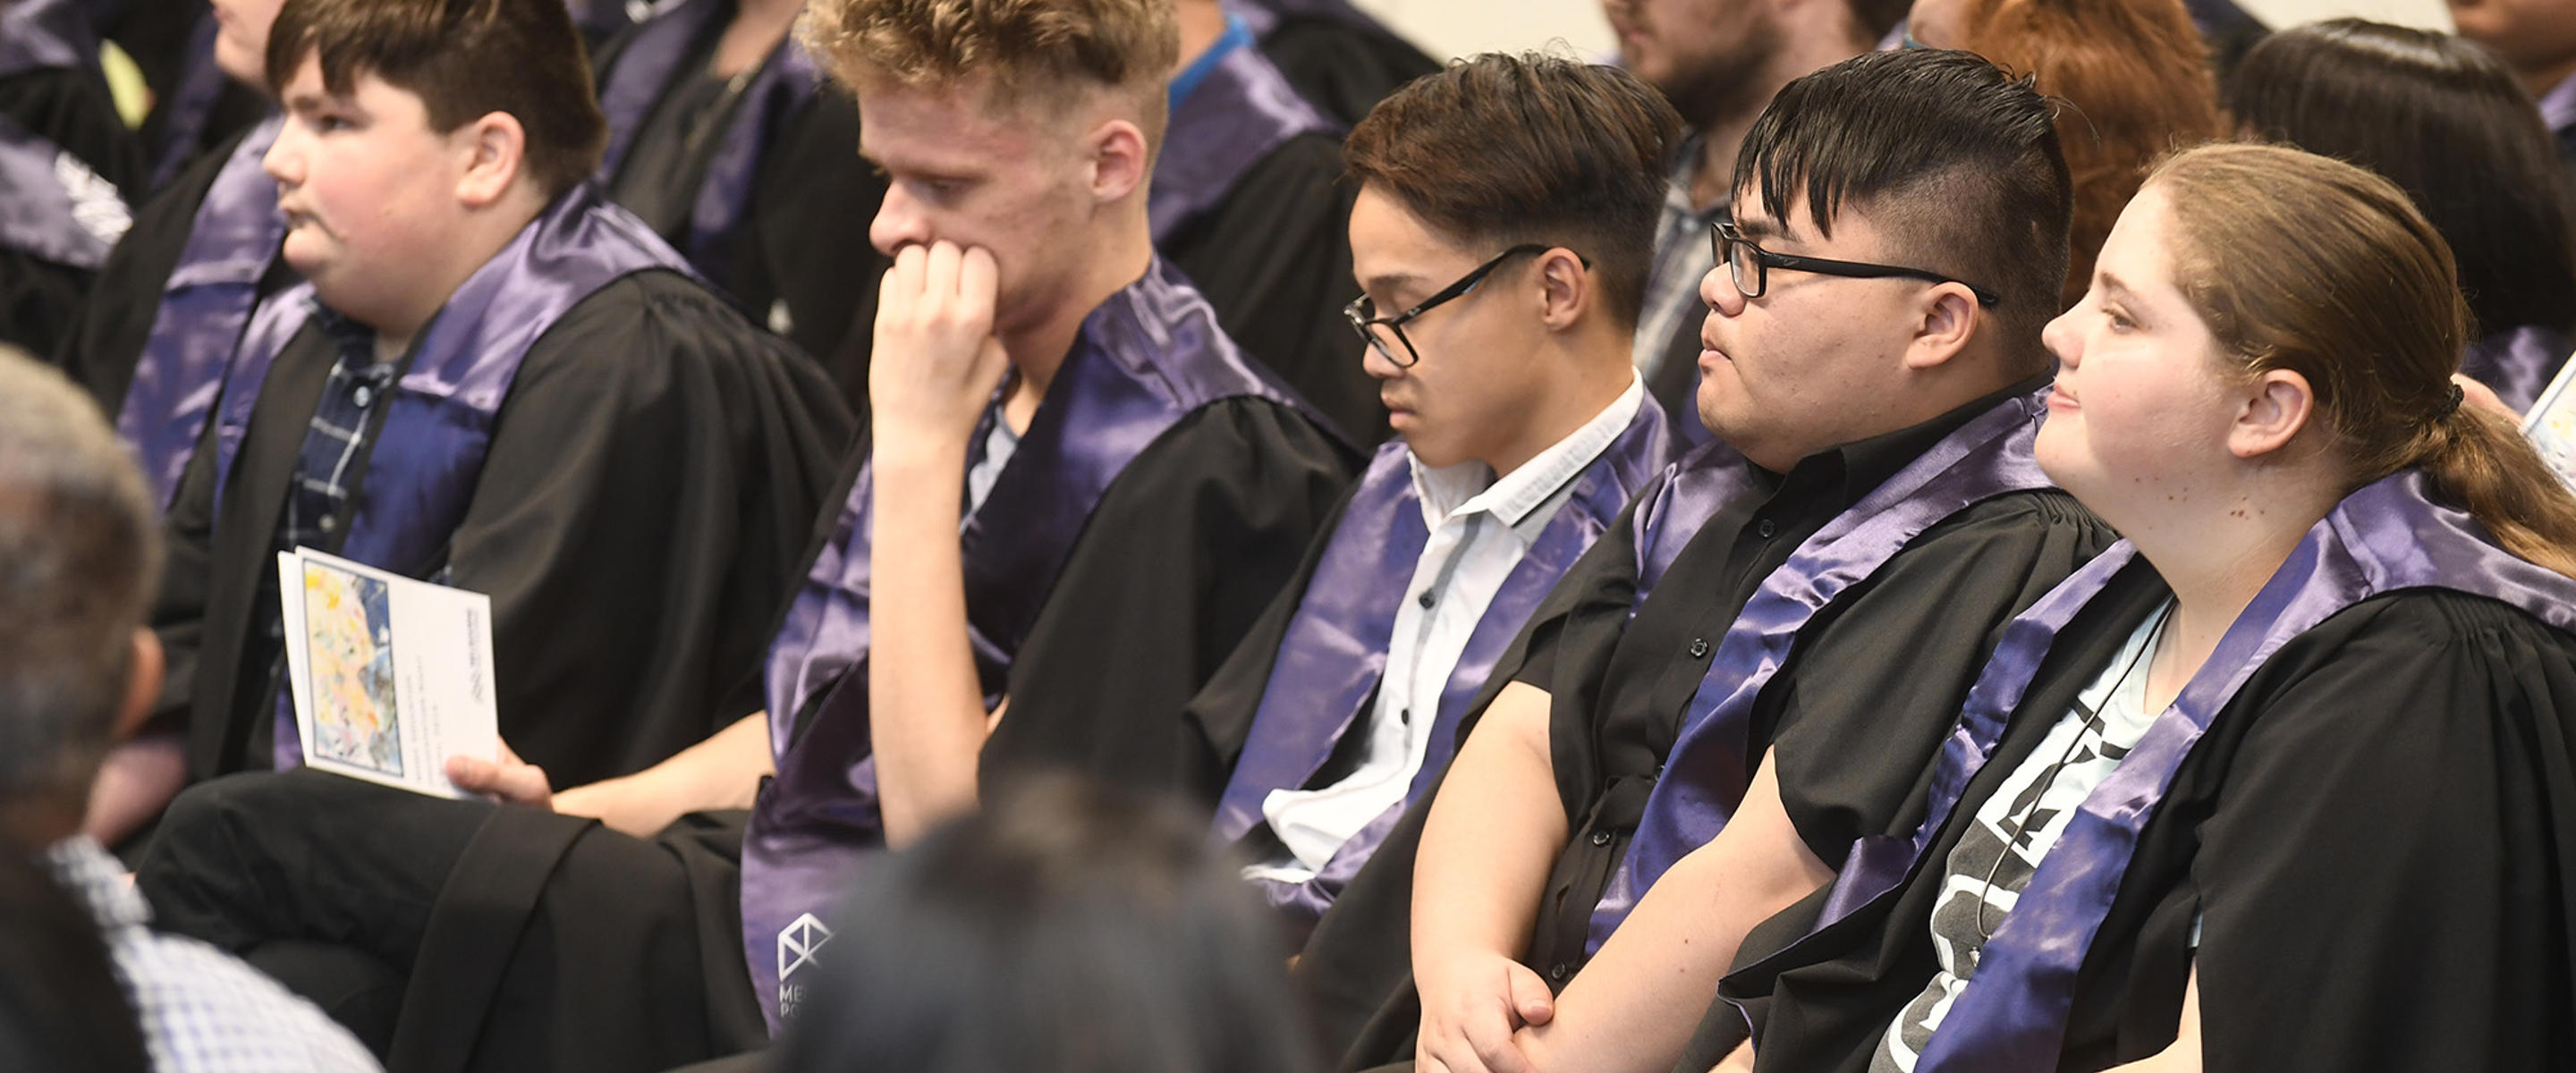 Melbourne Polytechnic work education students at their graduation ceremony